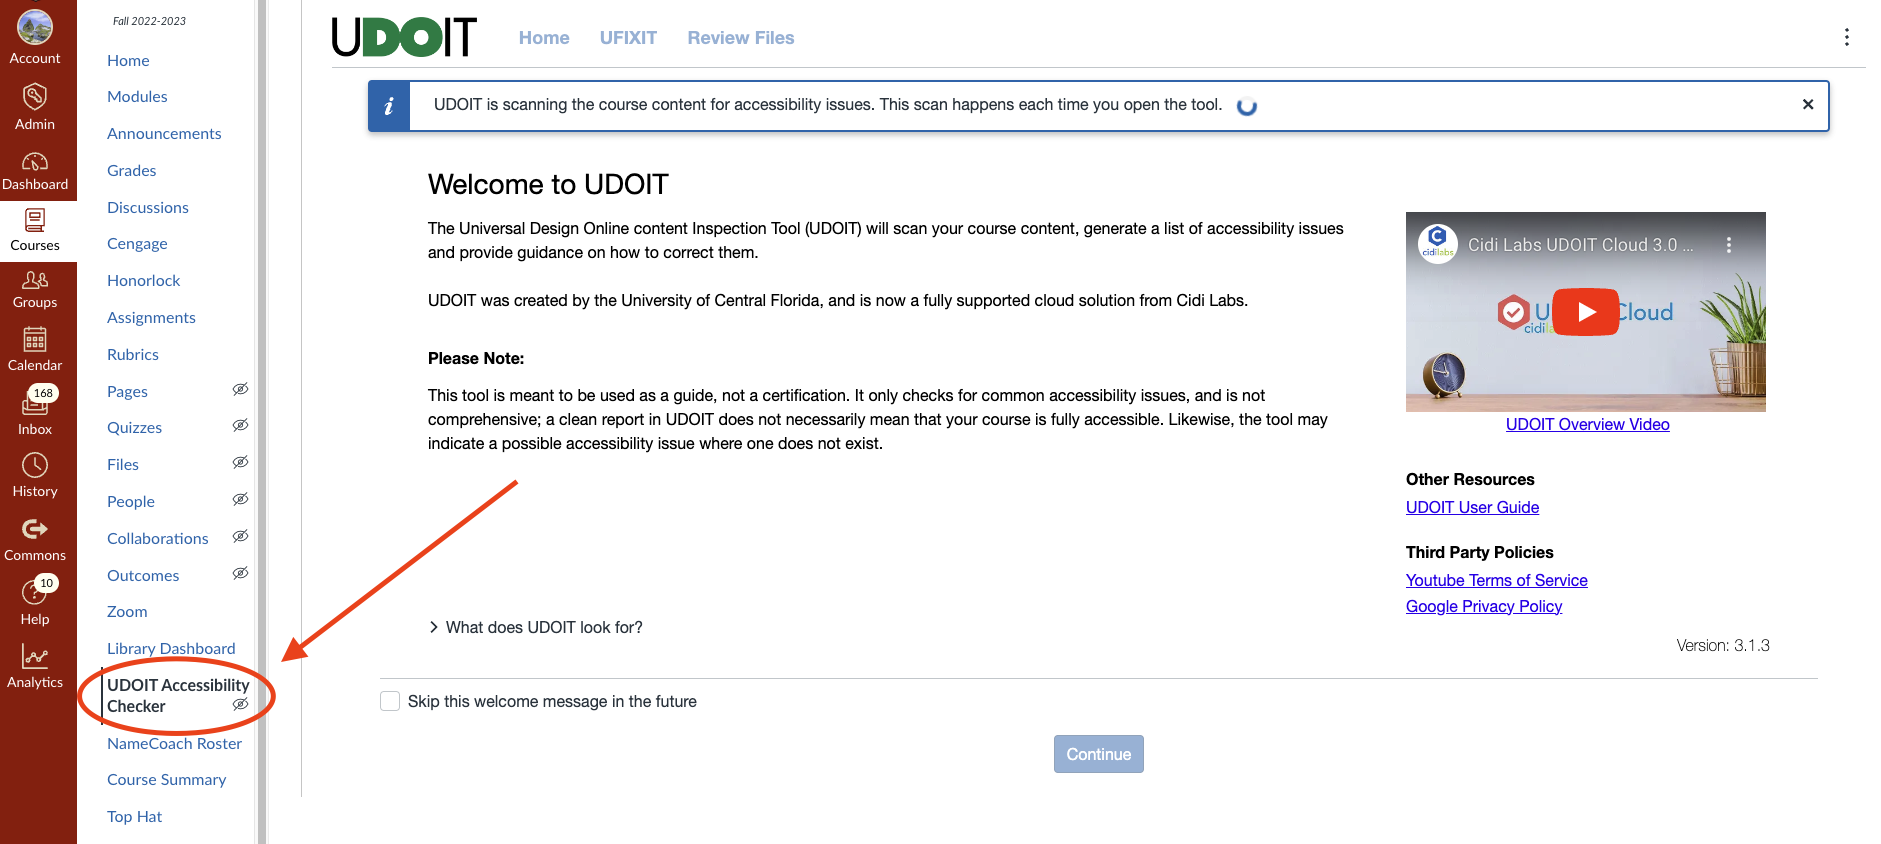 Screenshot of UDOIT Accessibility Checker in Canvas Menu